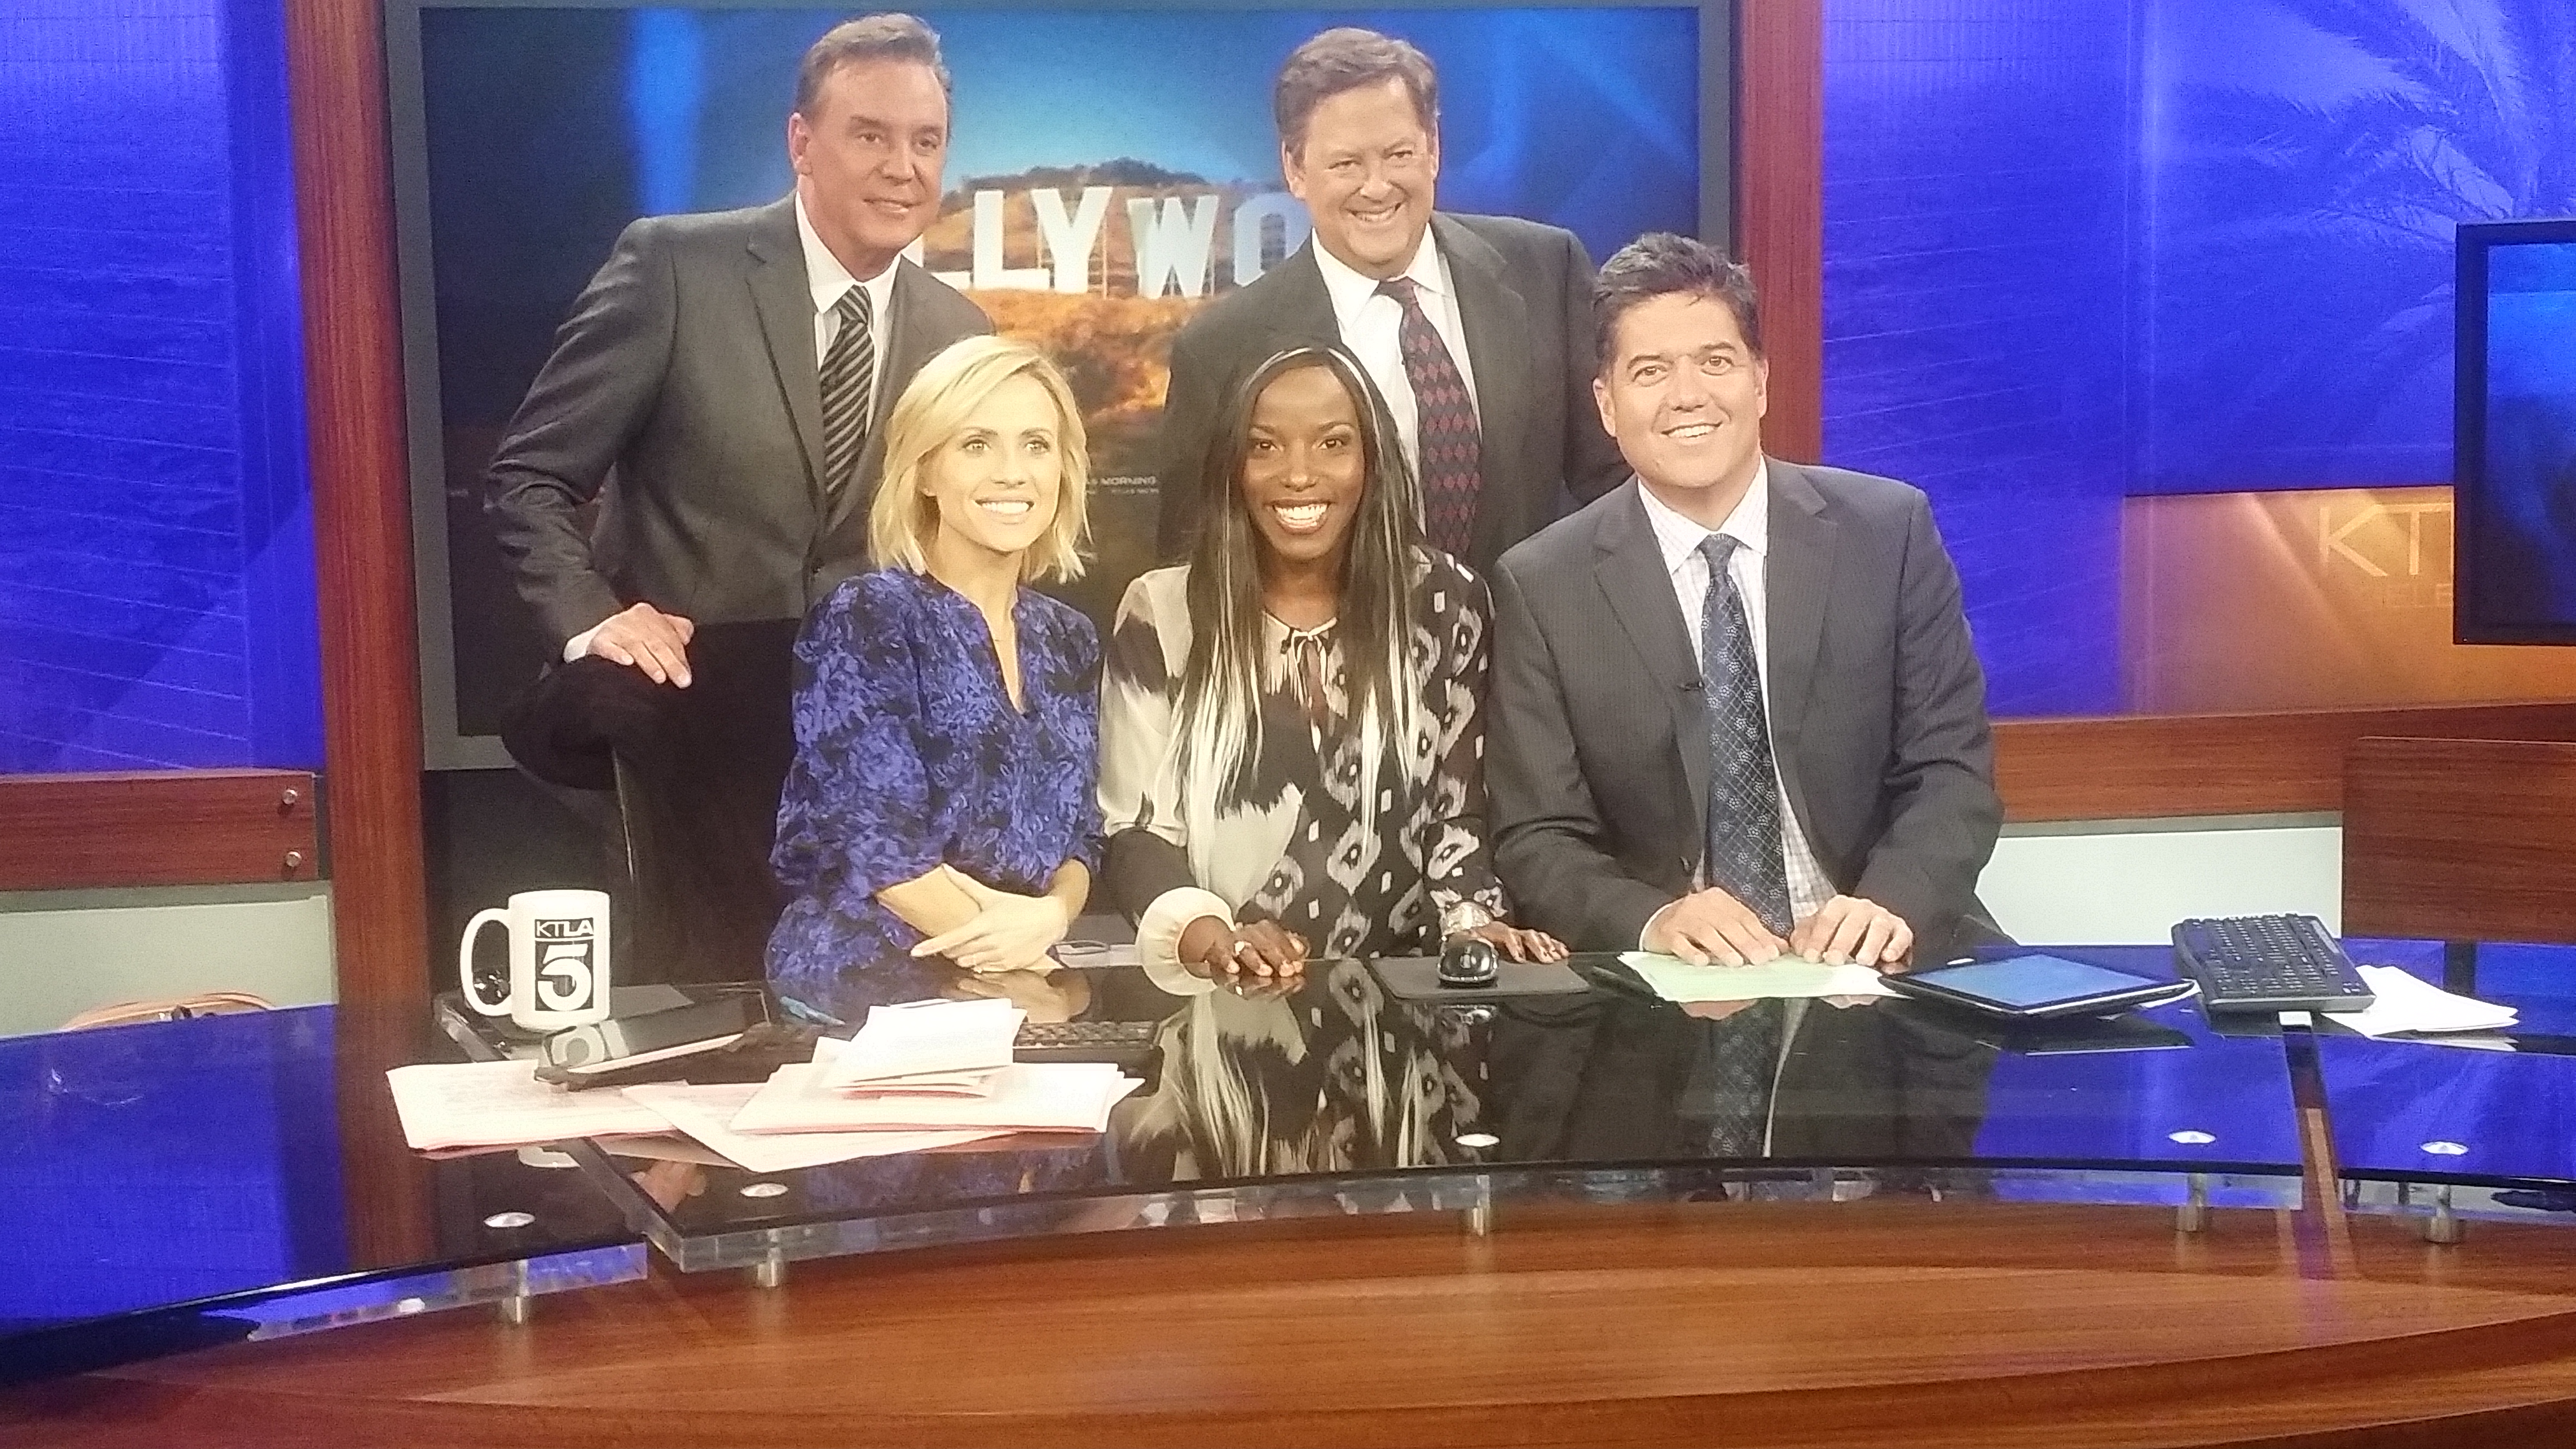 Janeshia Adams-Ginyard after her live in-studio interview on the KTLA Channel 5 Morning News in Los Angeles.